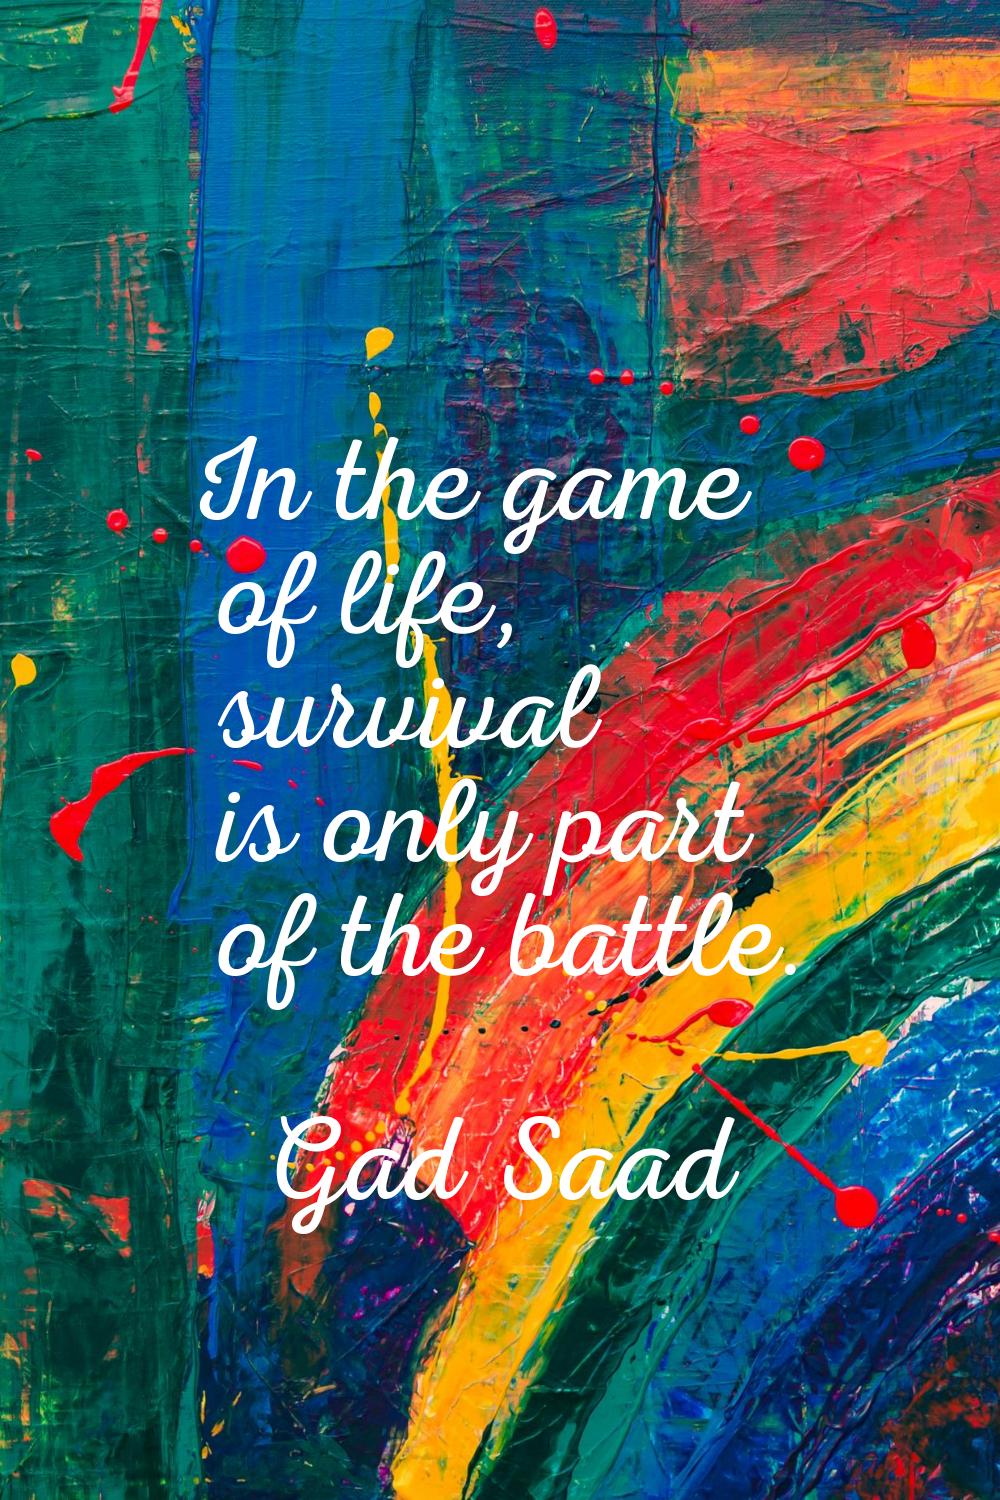 In the game of life, survival is only part of the battle.